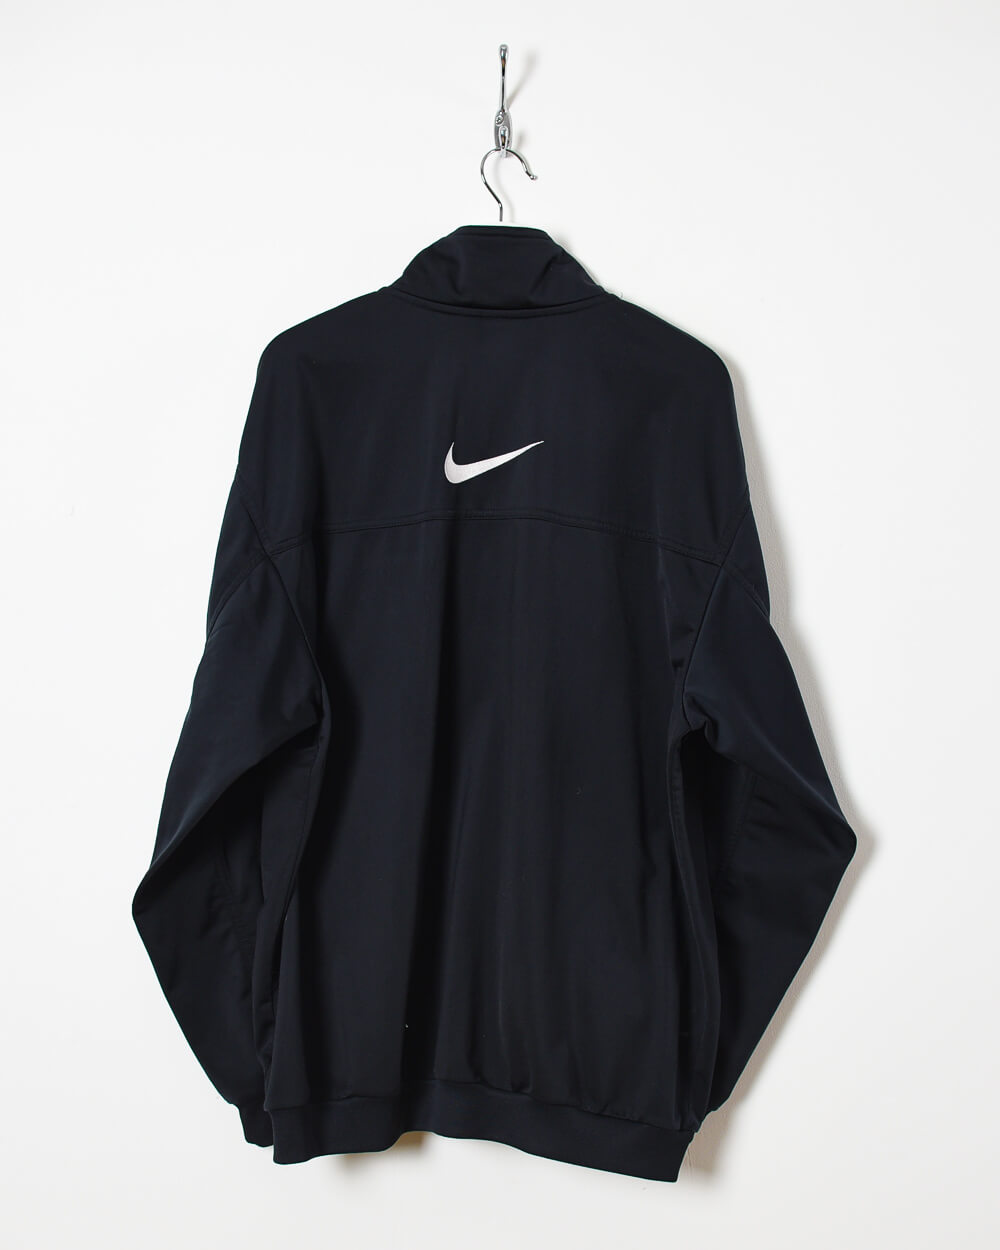 Nike Tracksuit Top - X-Large - Domno Vintage 90s, 80s, 00s Retro and Vintage Clothing 